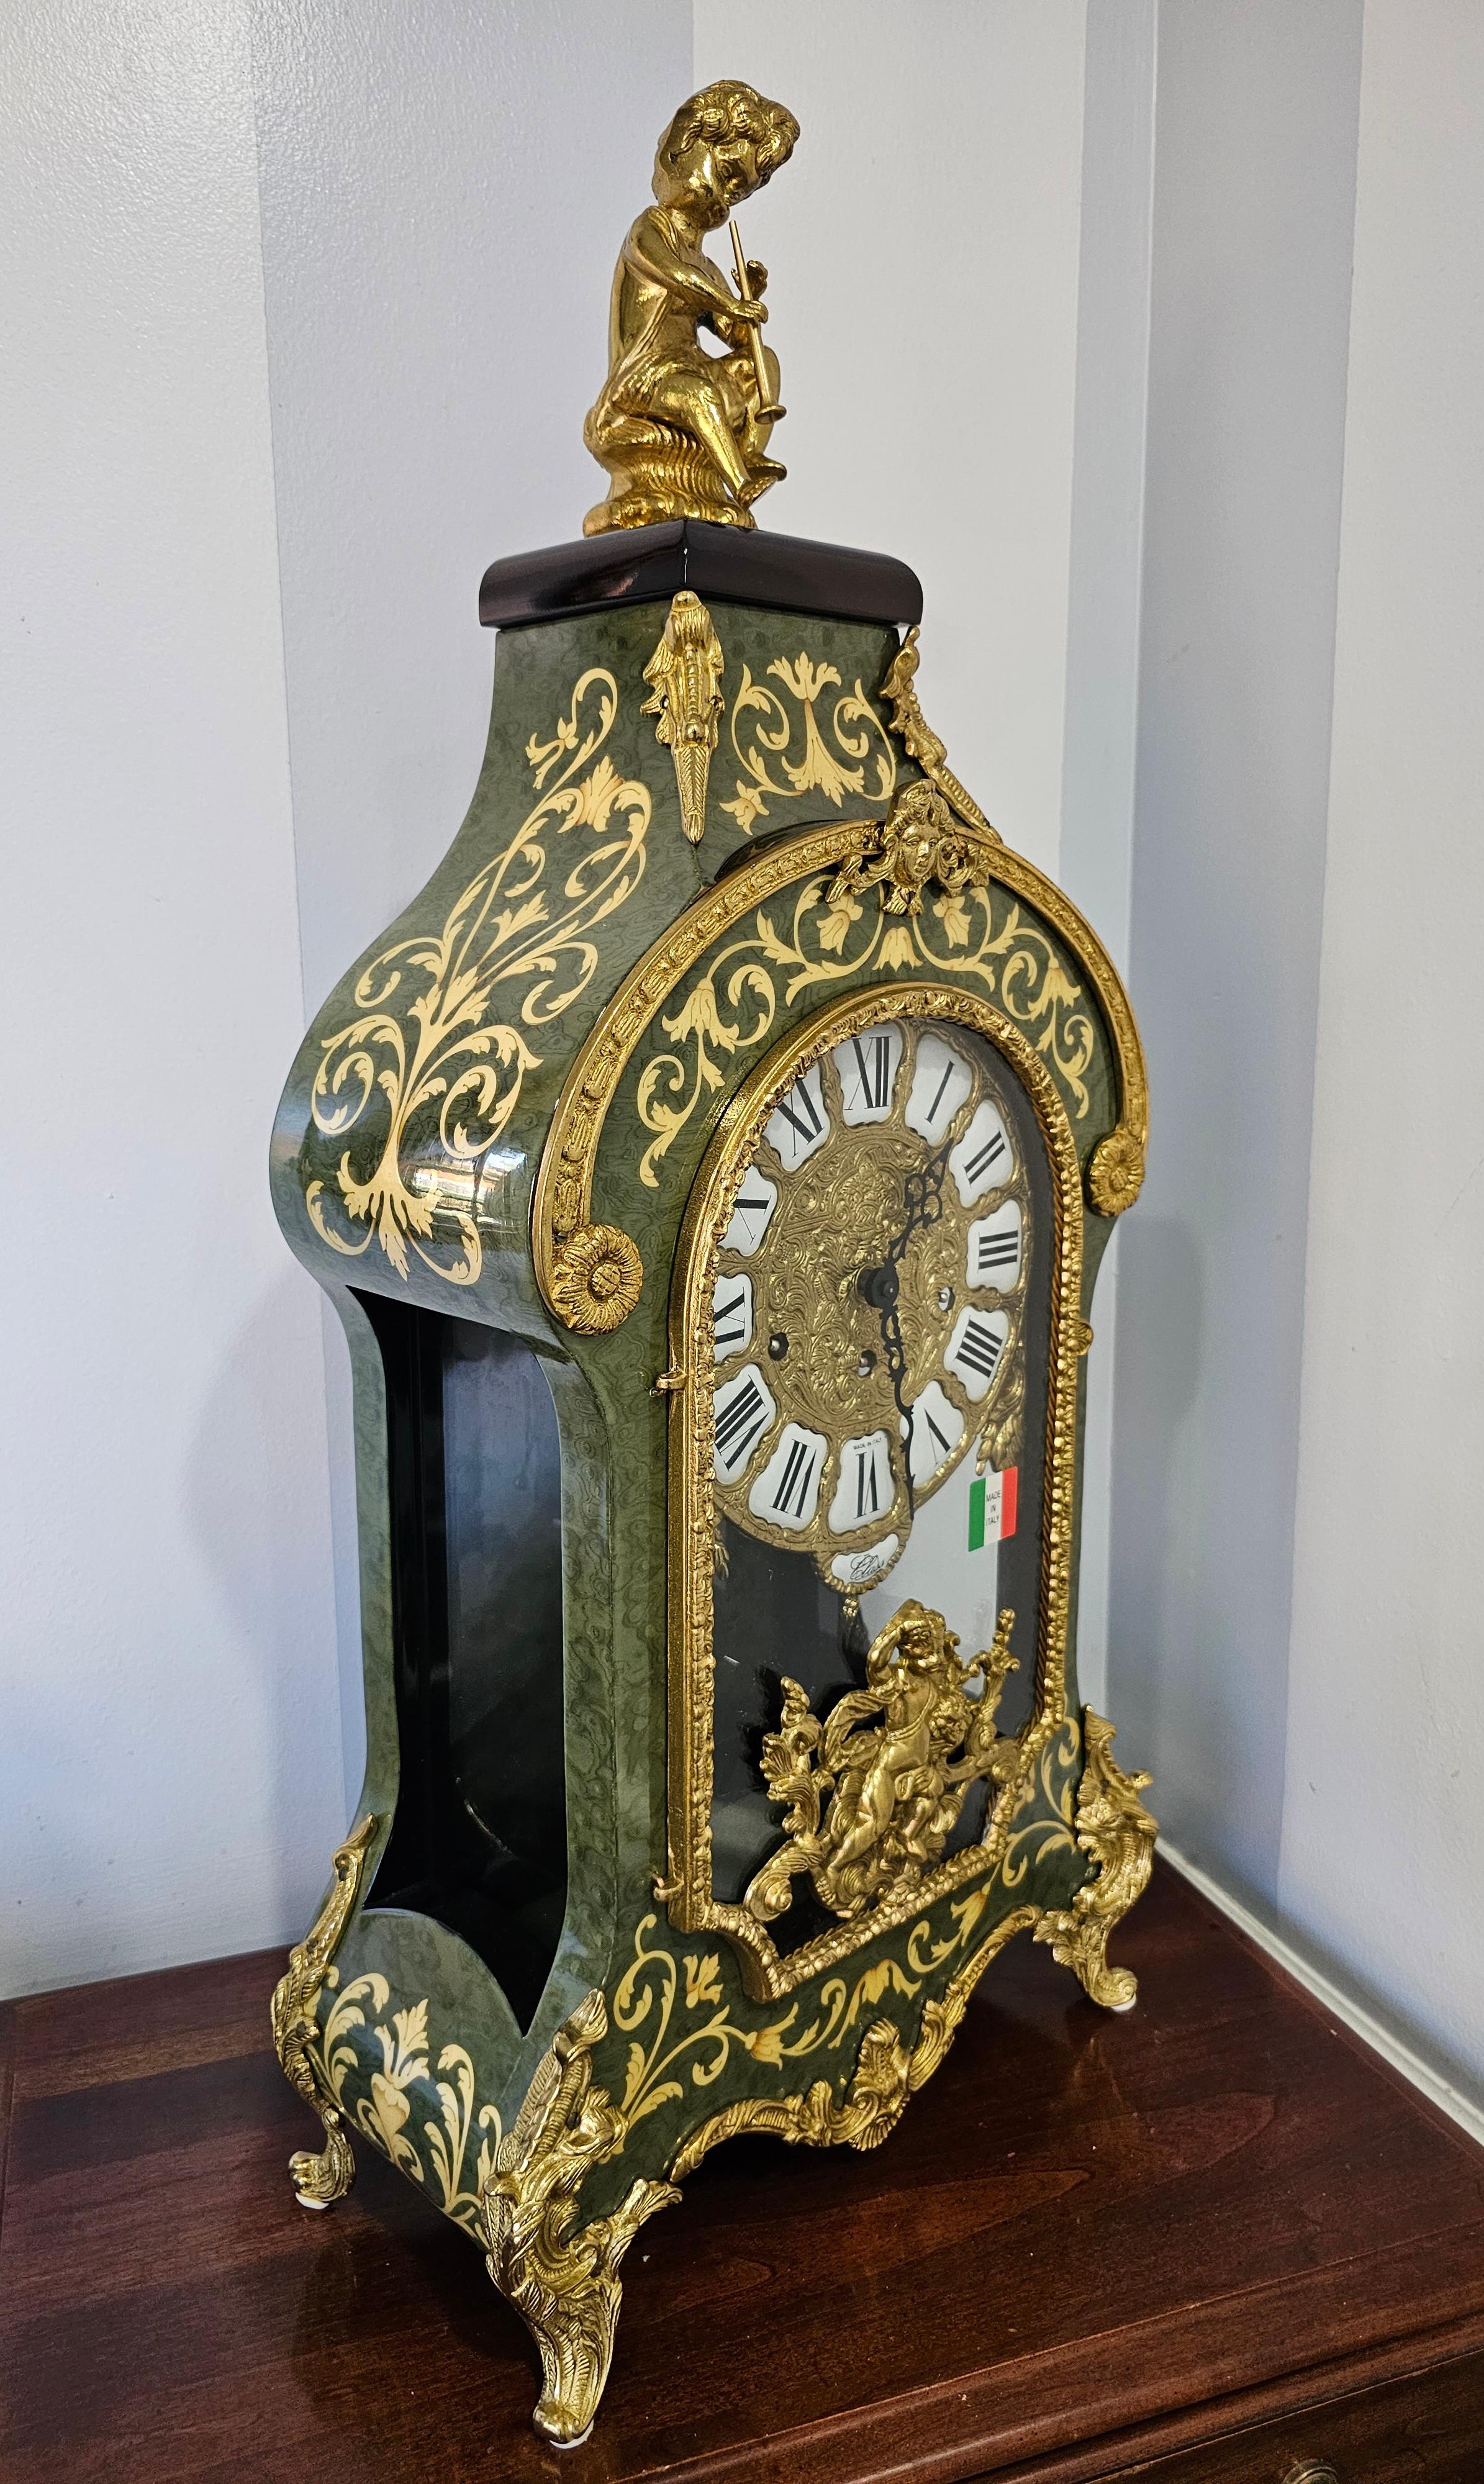 New Franz Hermle Mantel Clock in DeArt Italian Fine Marquetry and Ormolu Case In Excellent Condition For Sale In Germantown, MD